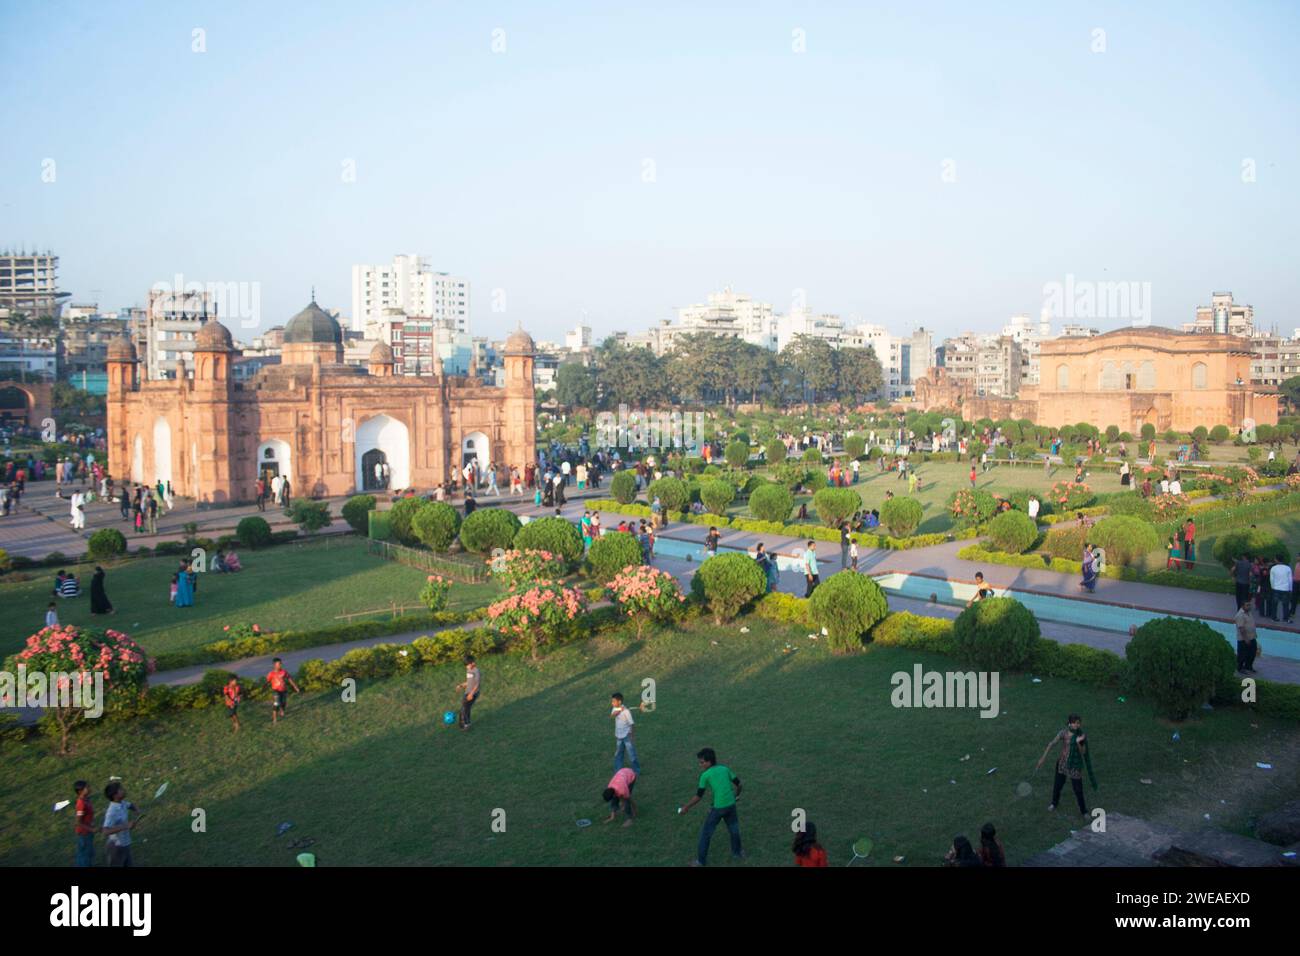 Lalbagh Fort is a fort in the old city of Dhaka. Its name is derived from its neighborhood Lalbagh, which means Red Garden. The term Lalbagh refers to reddish and pinkish architecture from the Mughal period. The original fort was called Fort Aurangabad. Bangladesh. Stock Photo